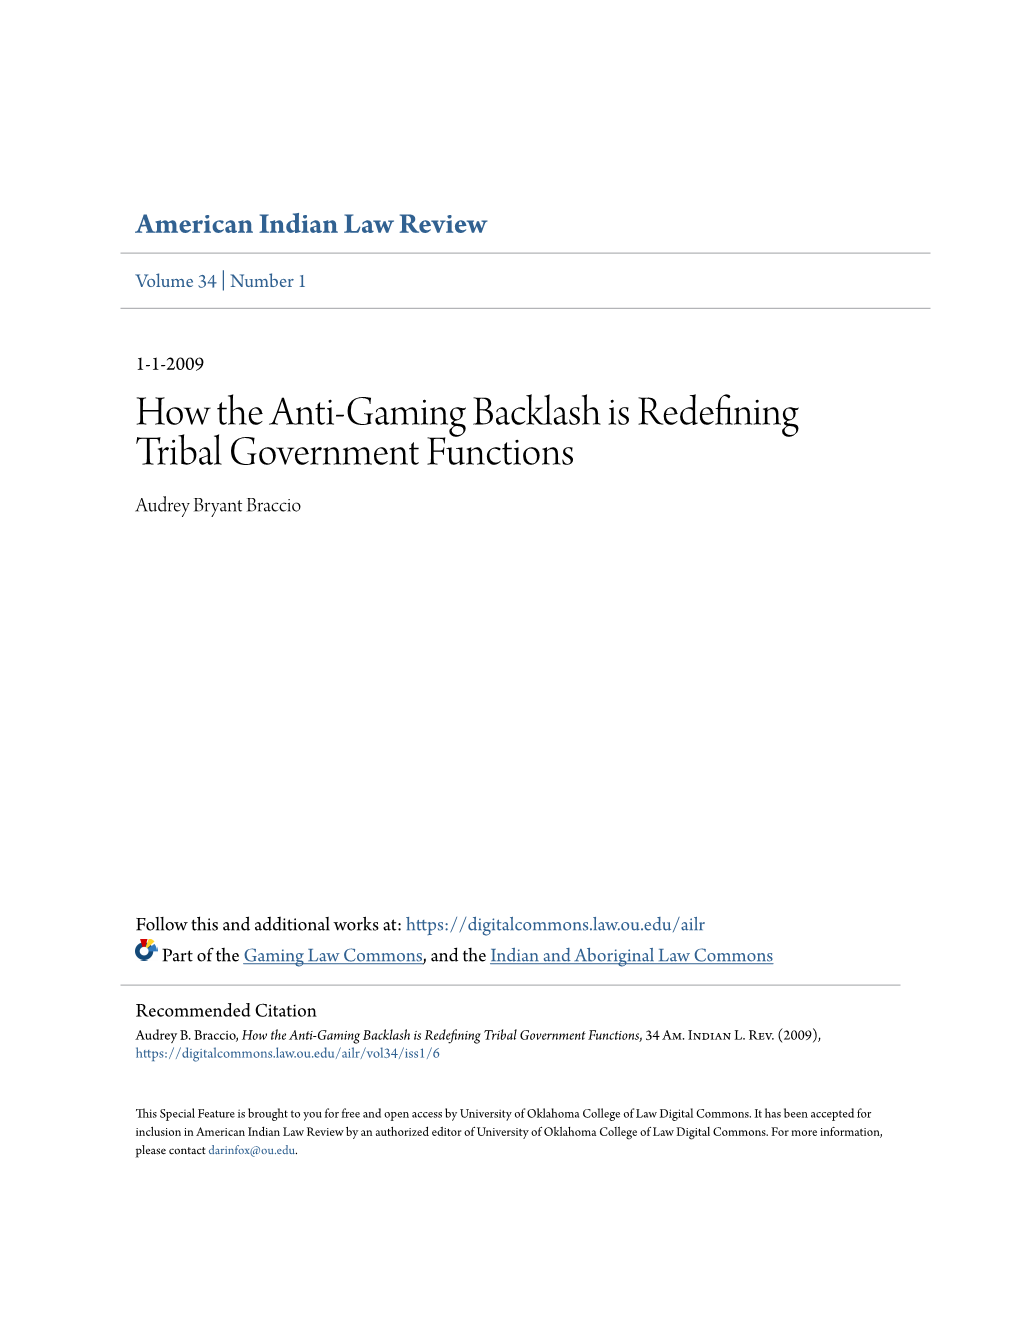 How the Anti-Gaming Backlash Is Redefining Tribal Government Functions Audrey Bryant Braccio